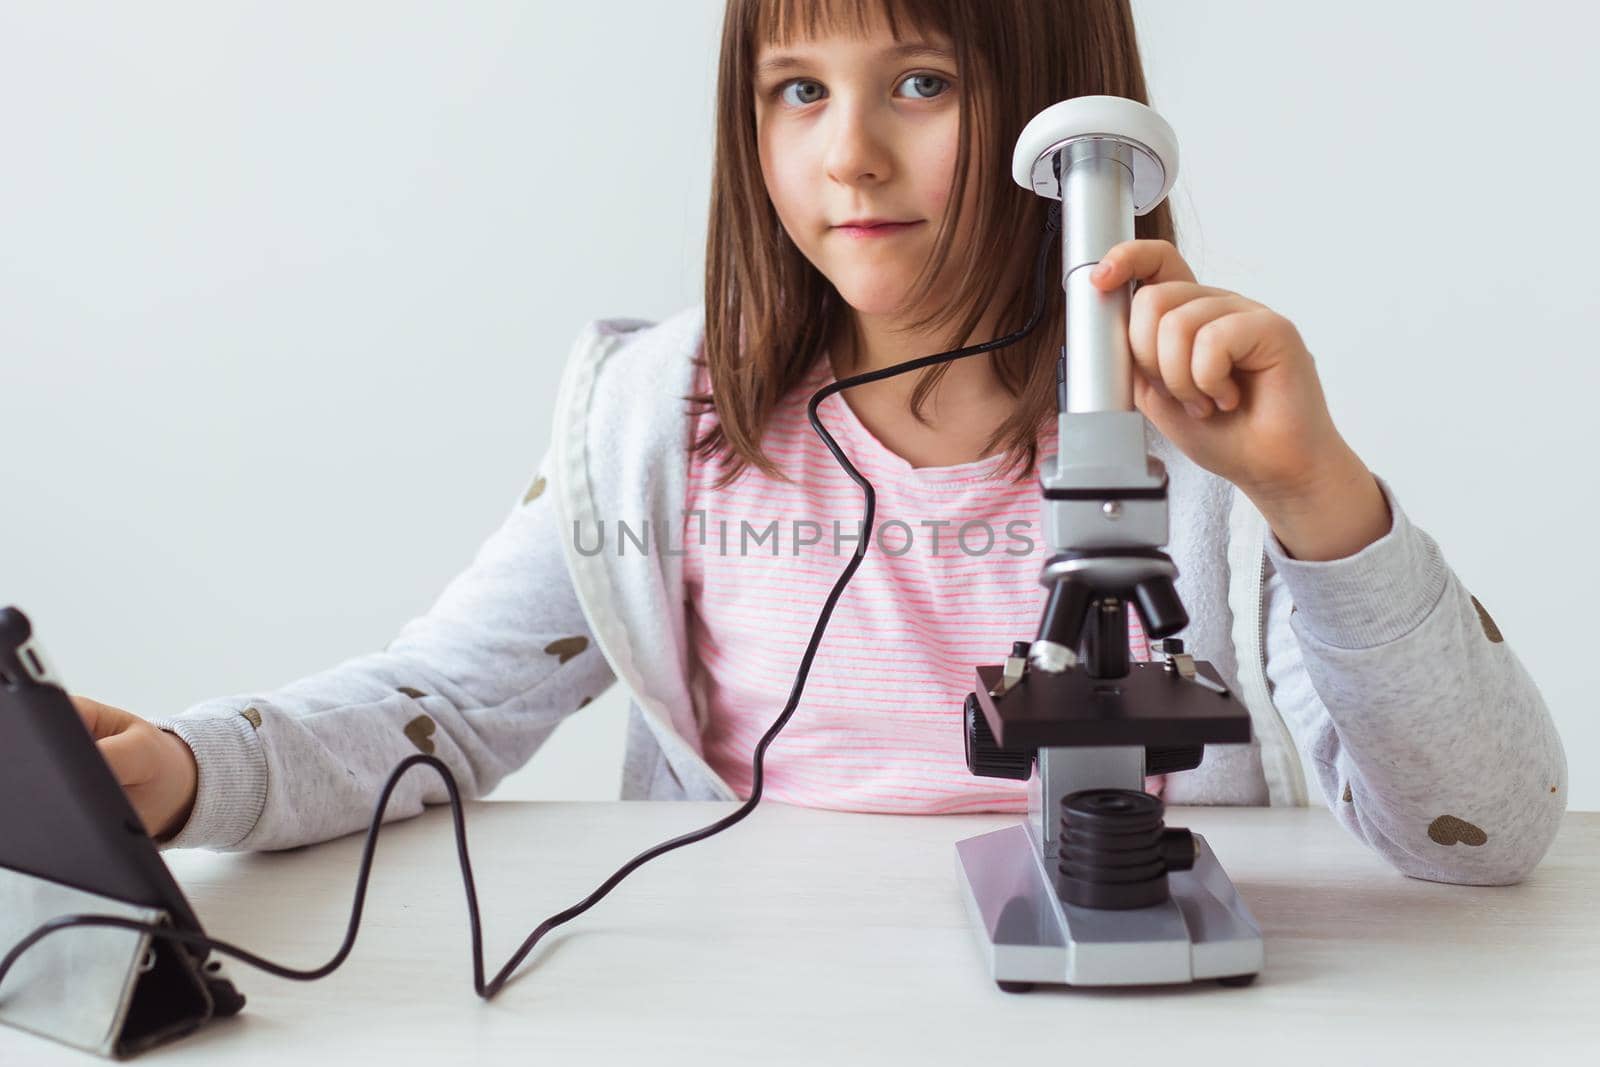 Child girl in science class using digital microscope. Technologies, children and learning.